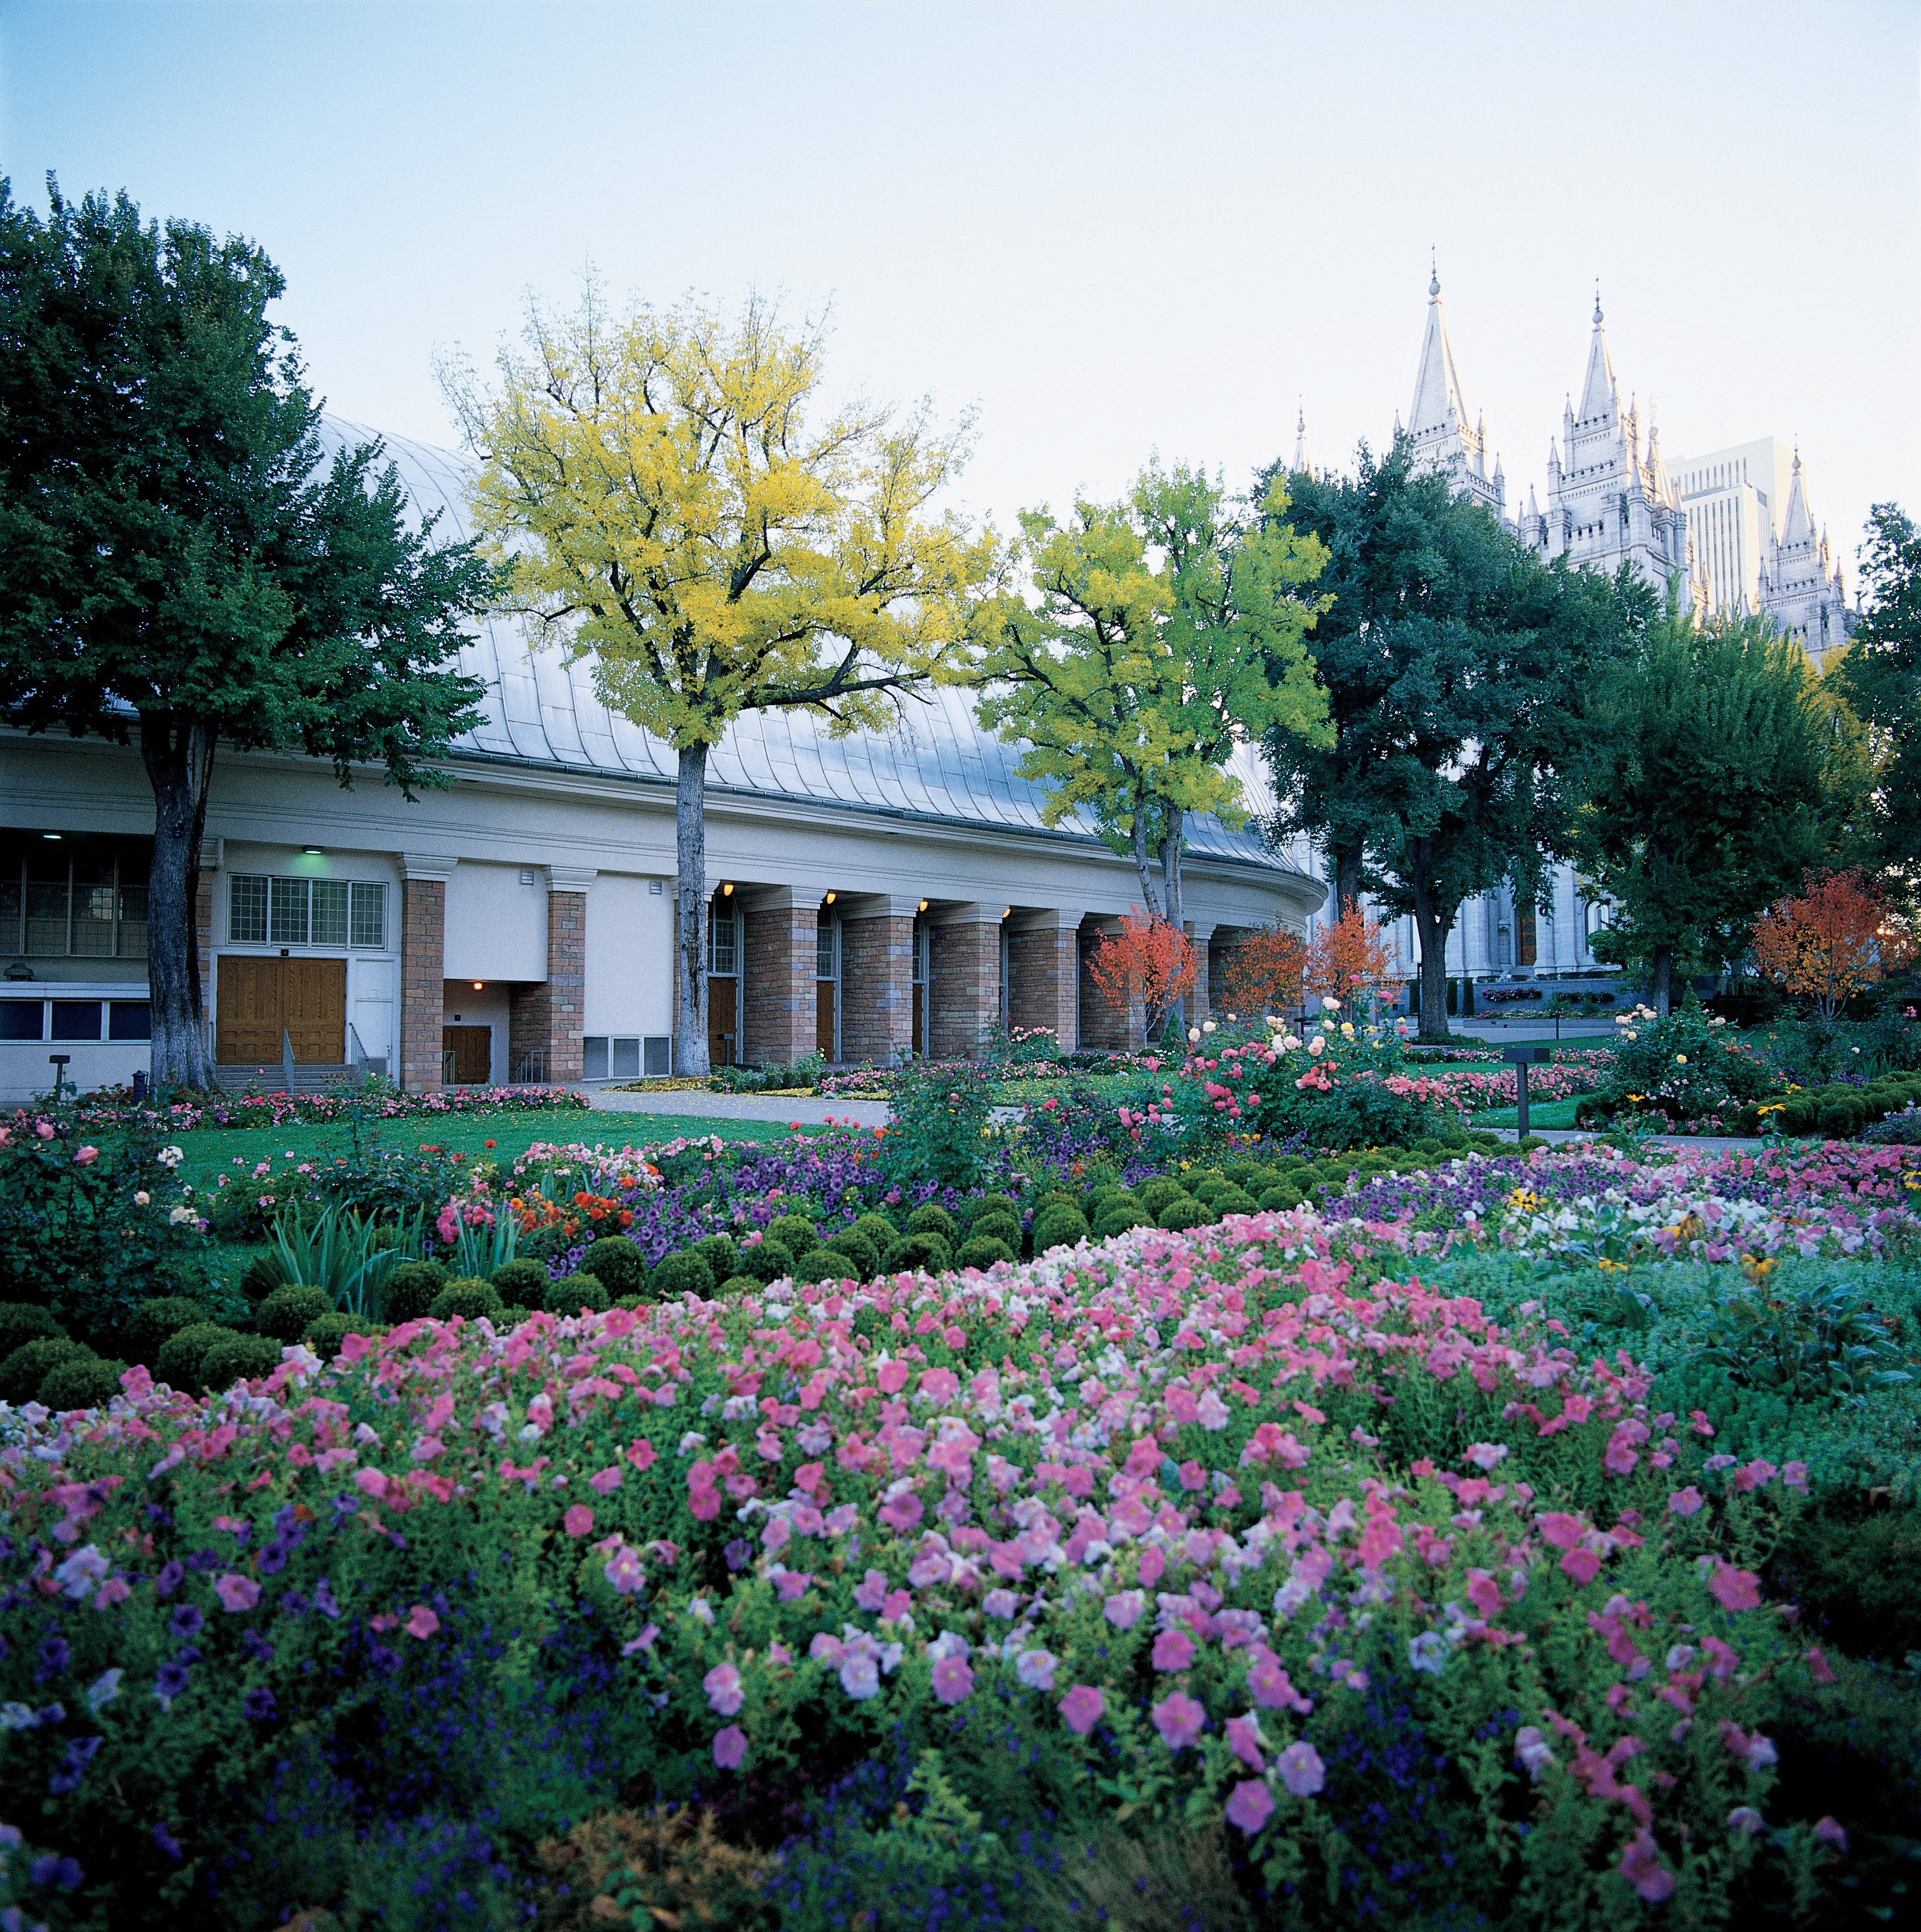 A view of the Salt Lake Tabernacle in the summer with flowers in the foreground and the temple seen in the distance.